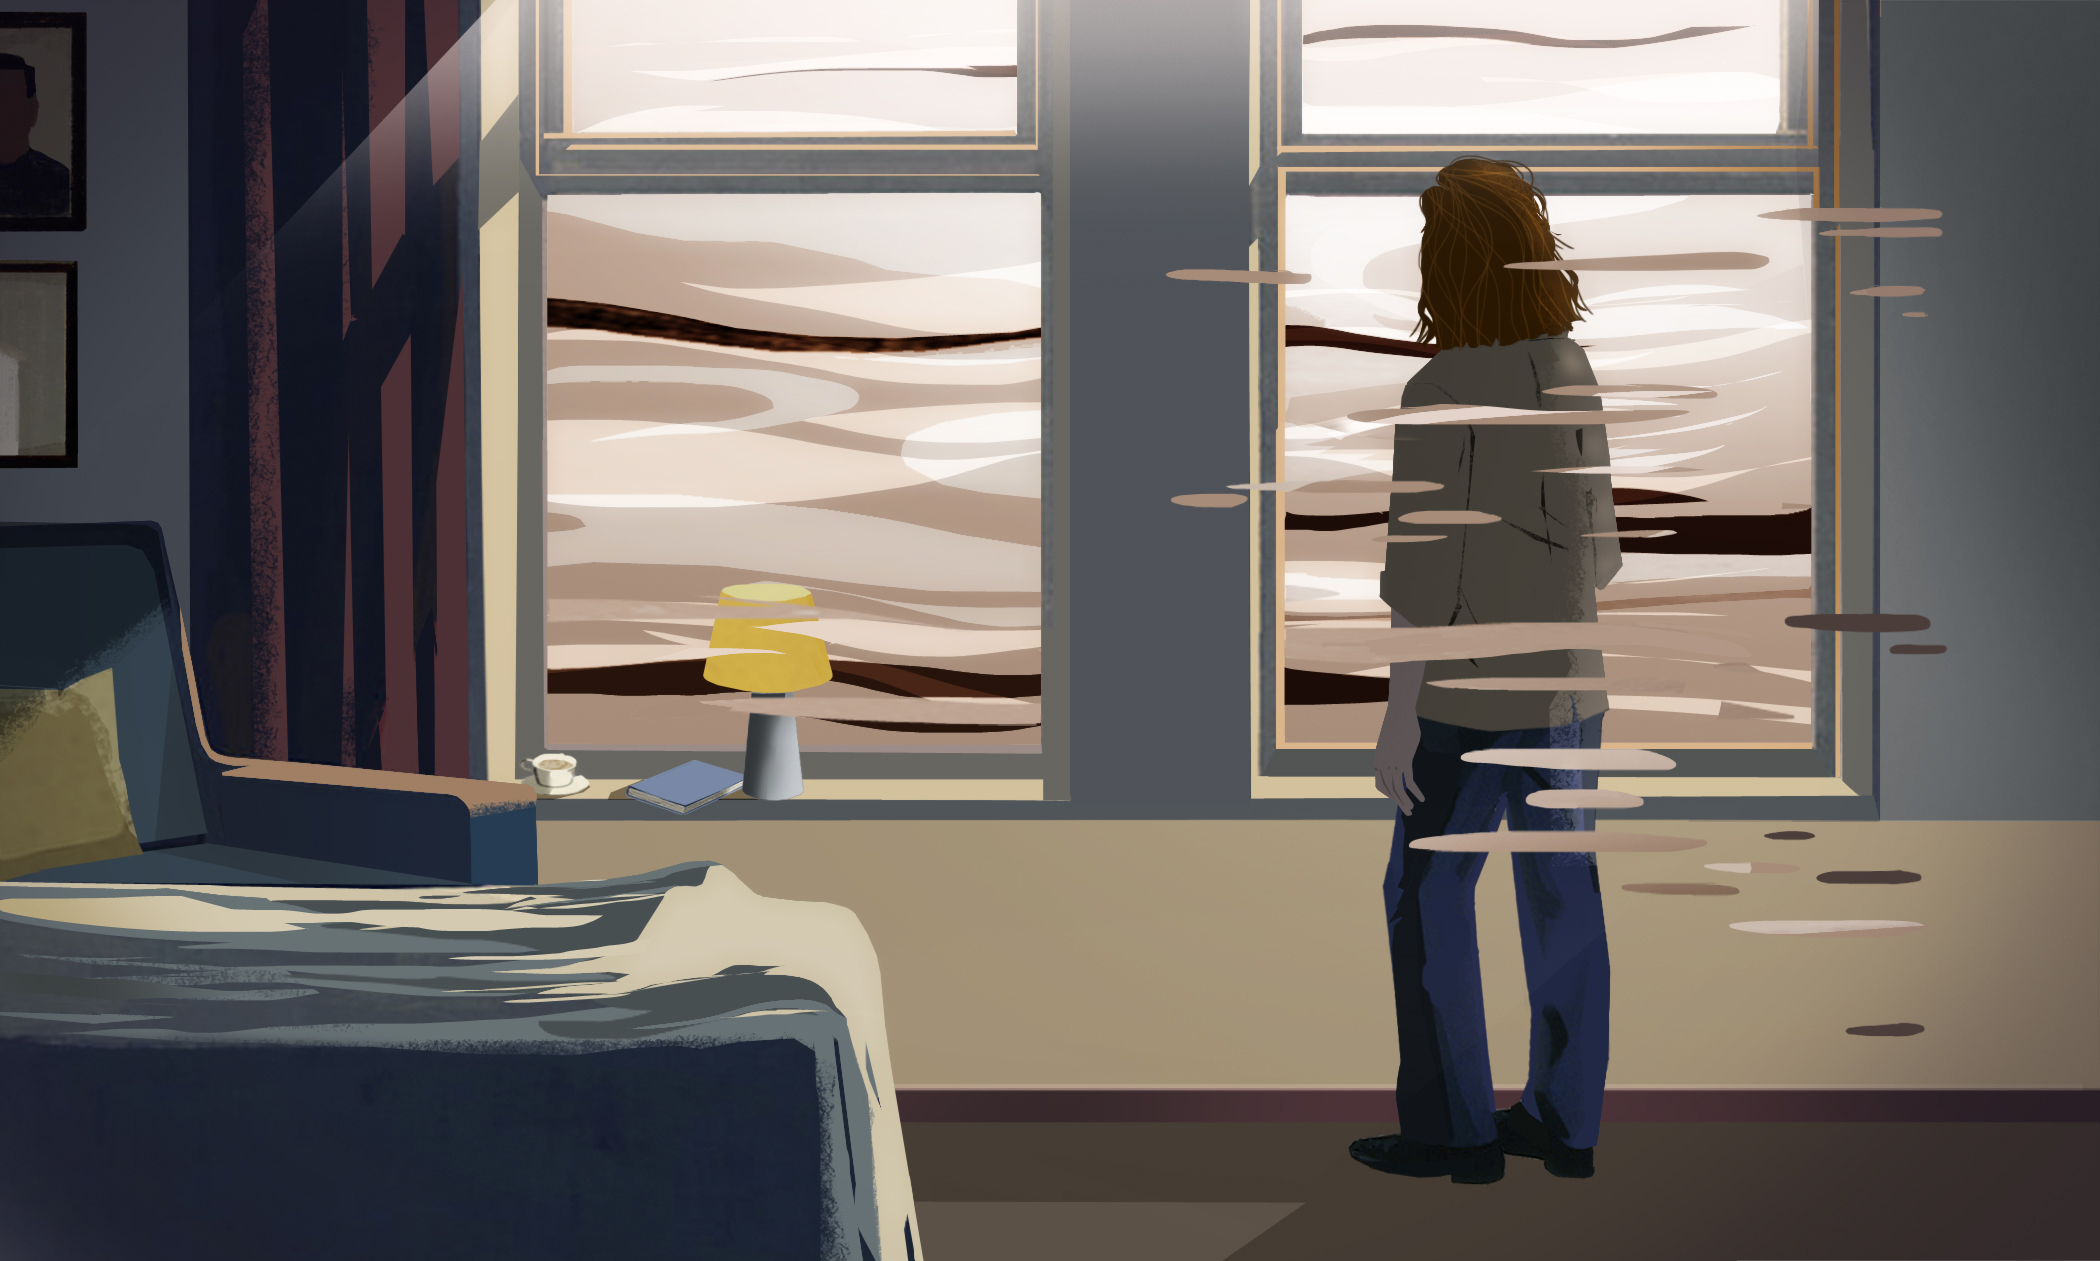 The figure of a woman stares out a window in this illustration.